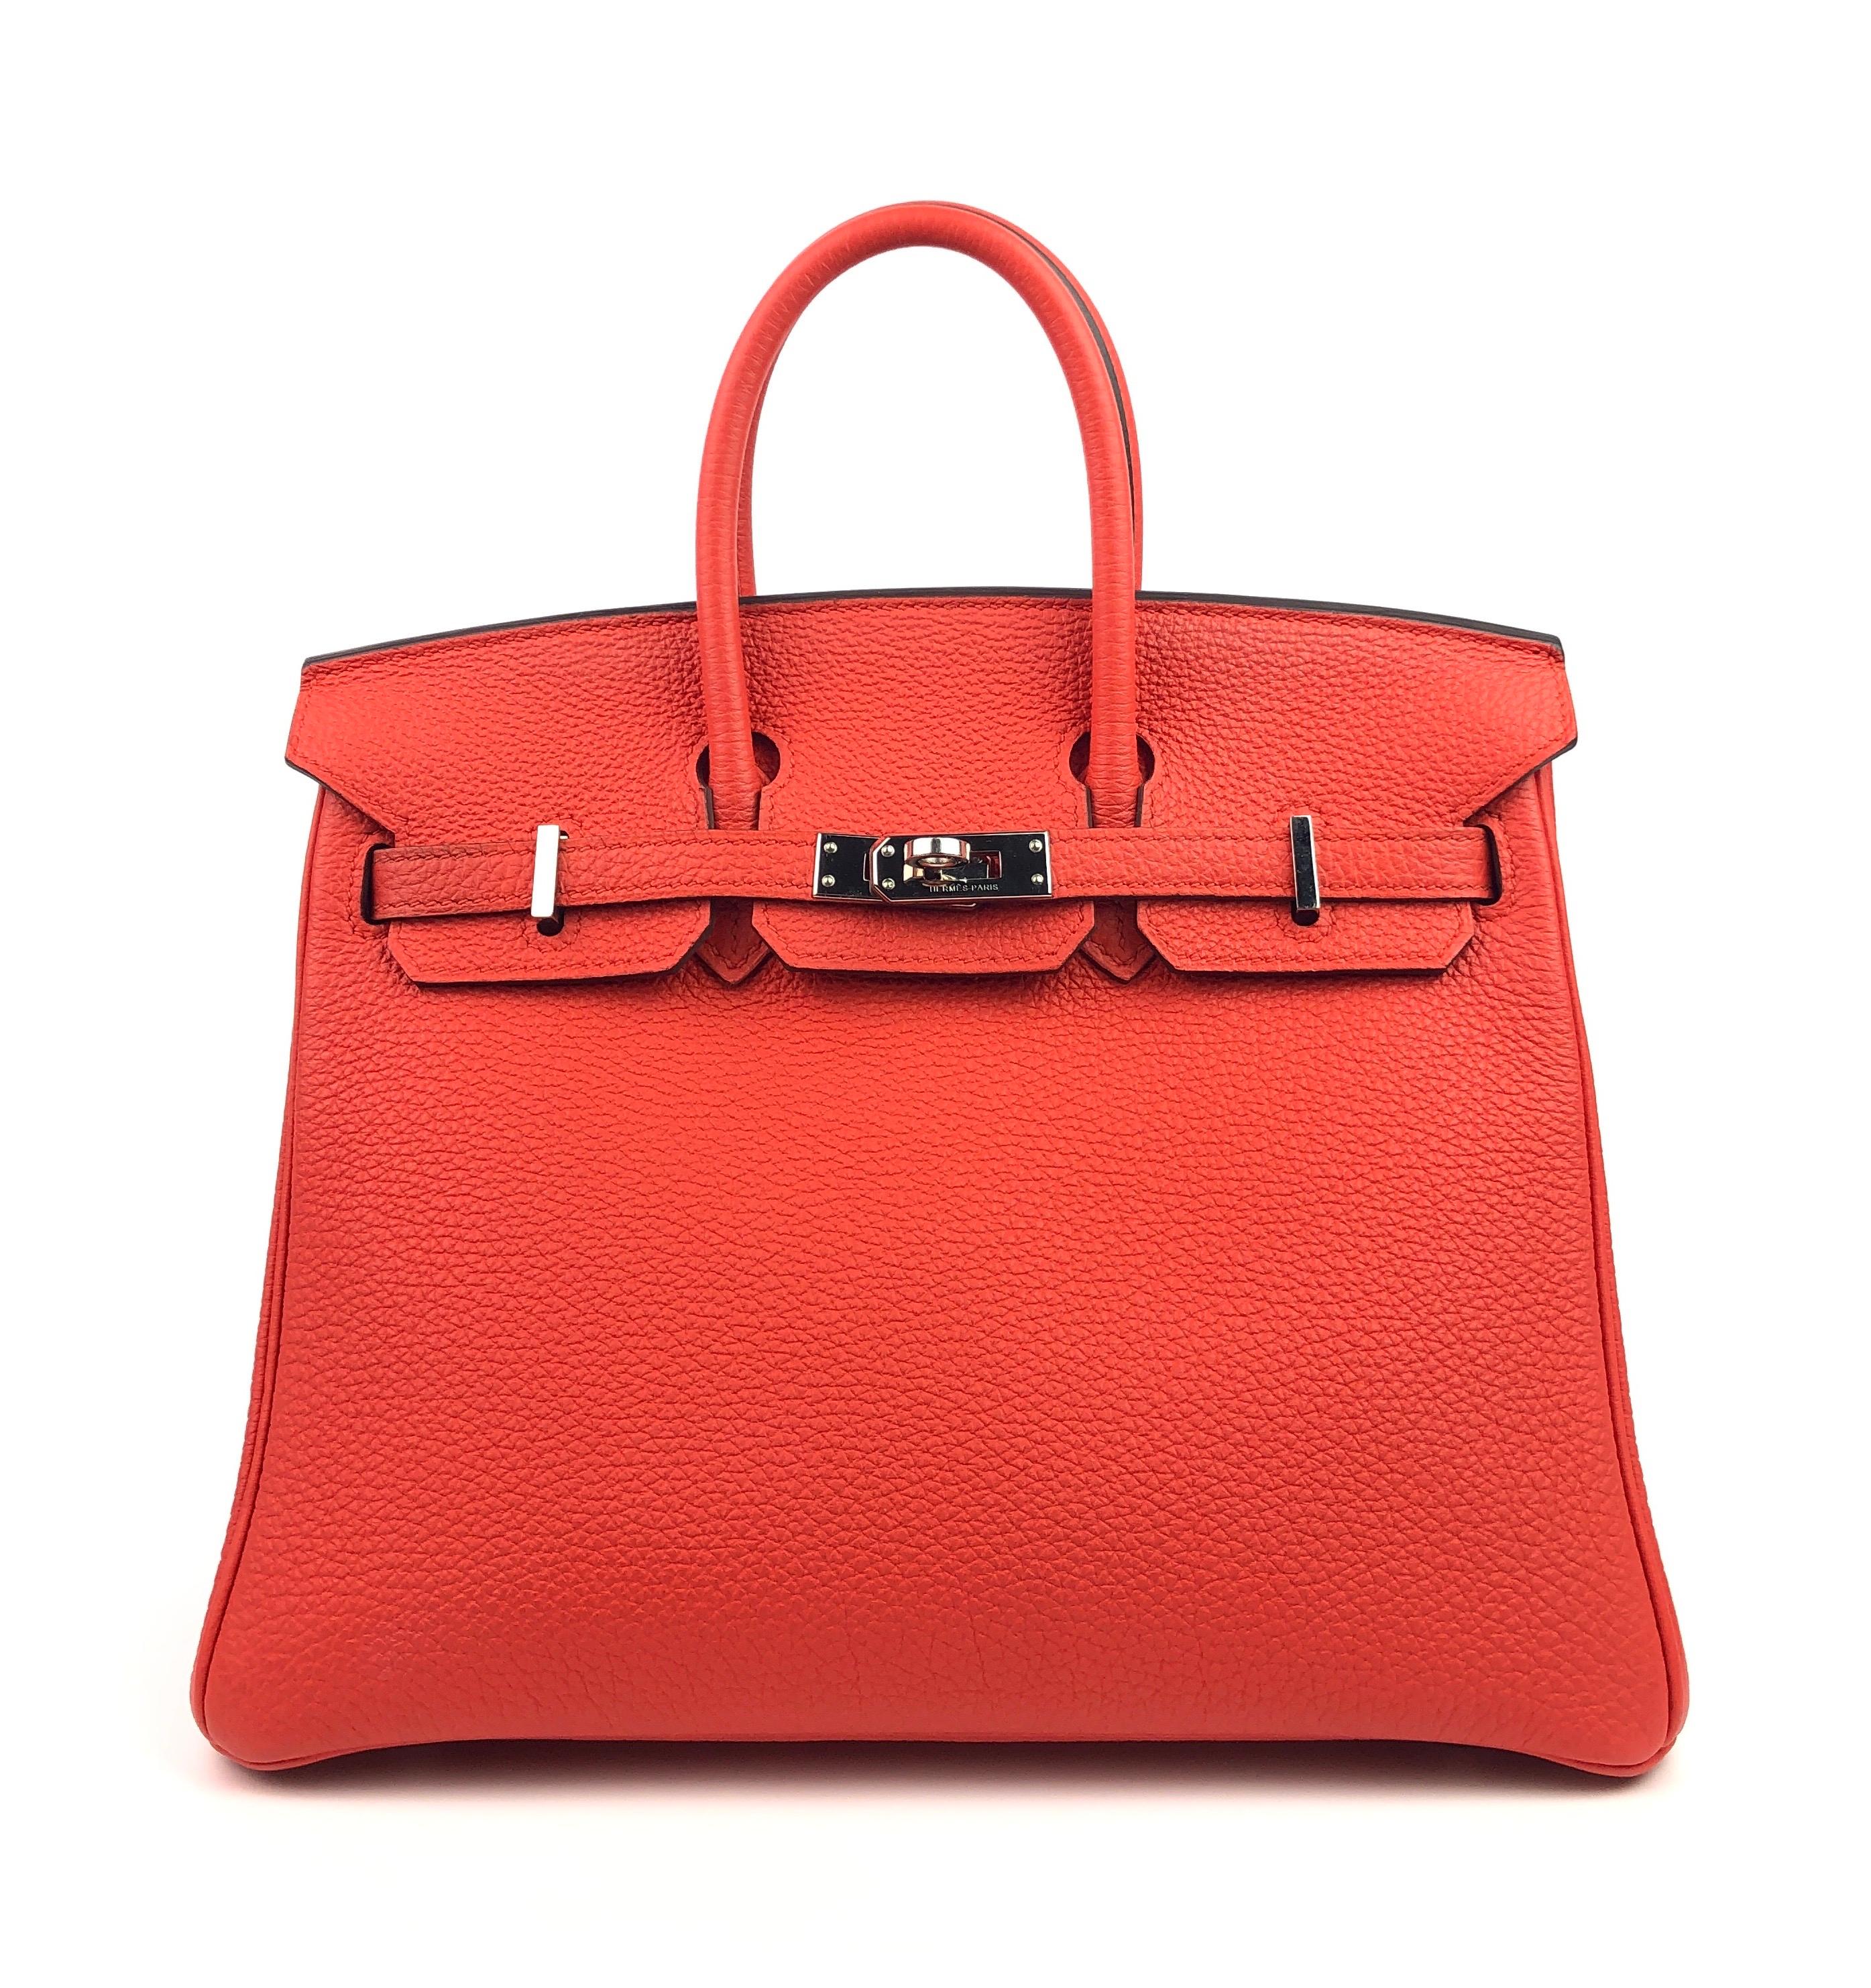 Stunning Hermes Birkin 25 Capucine Togo Palladium Hardware. Excellent Condition, light hairlines on hardware, excellent structure and corners. 2016 X Stamp. 

Shop with Confidence from Lux Addicts. Authenticity Guaranteed! 